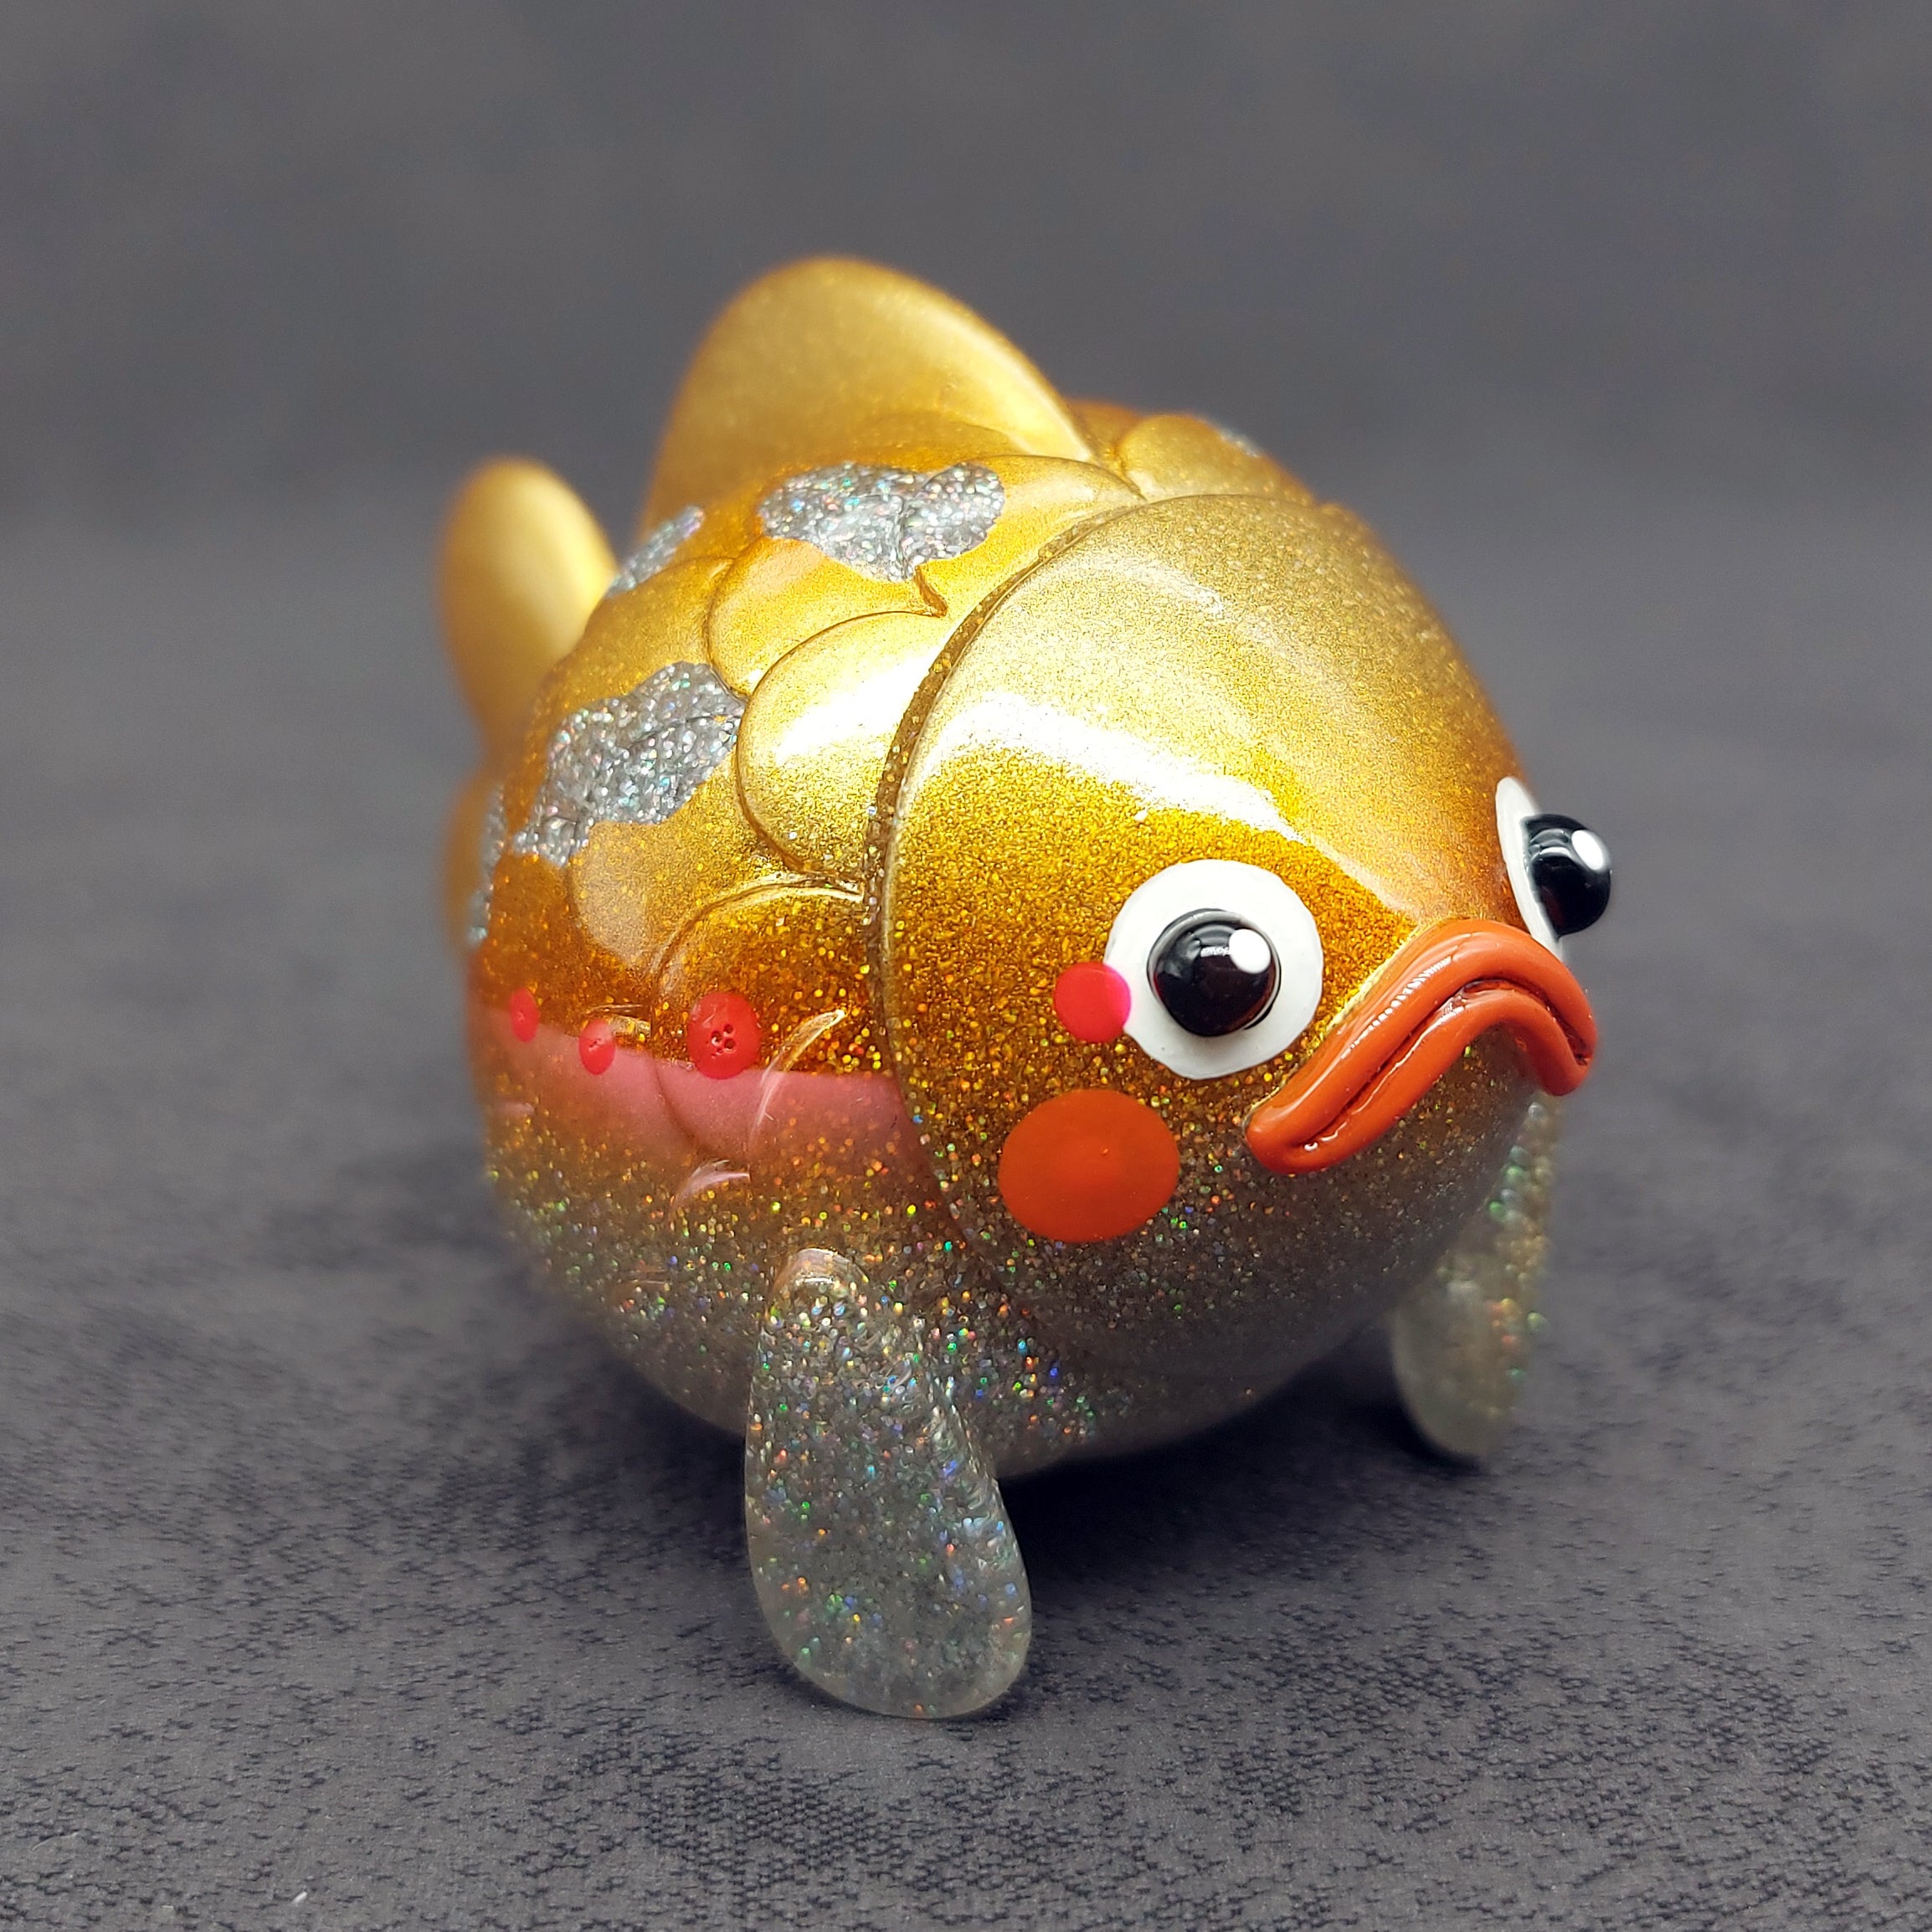 Gold Ball Fish by 78jo